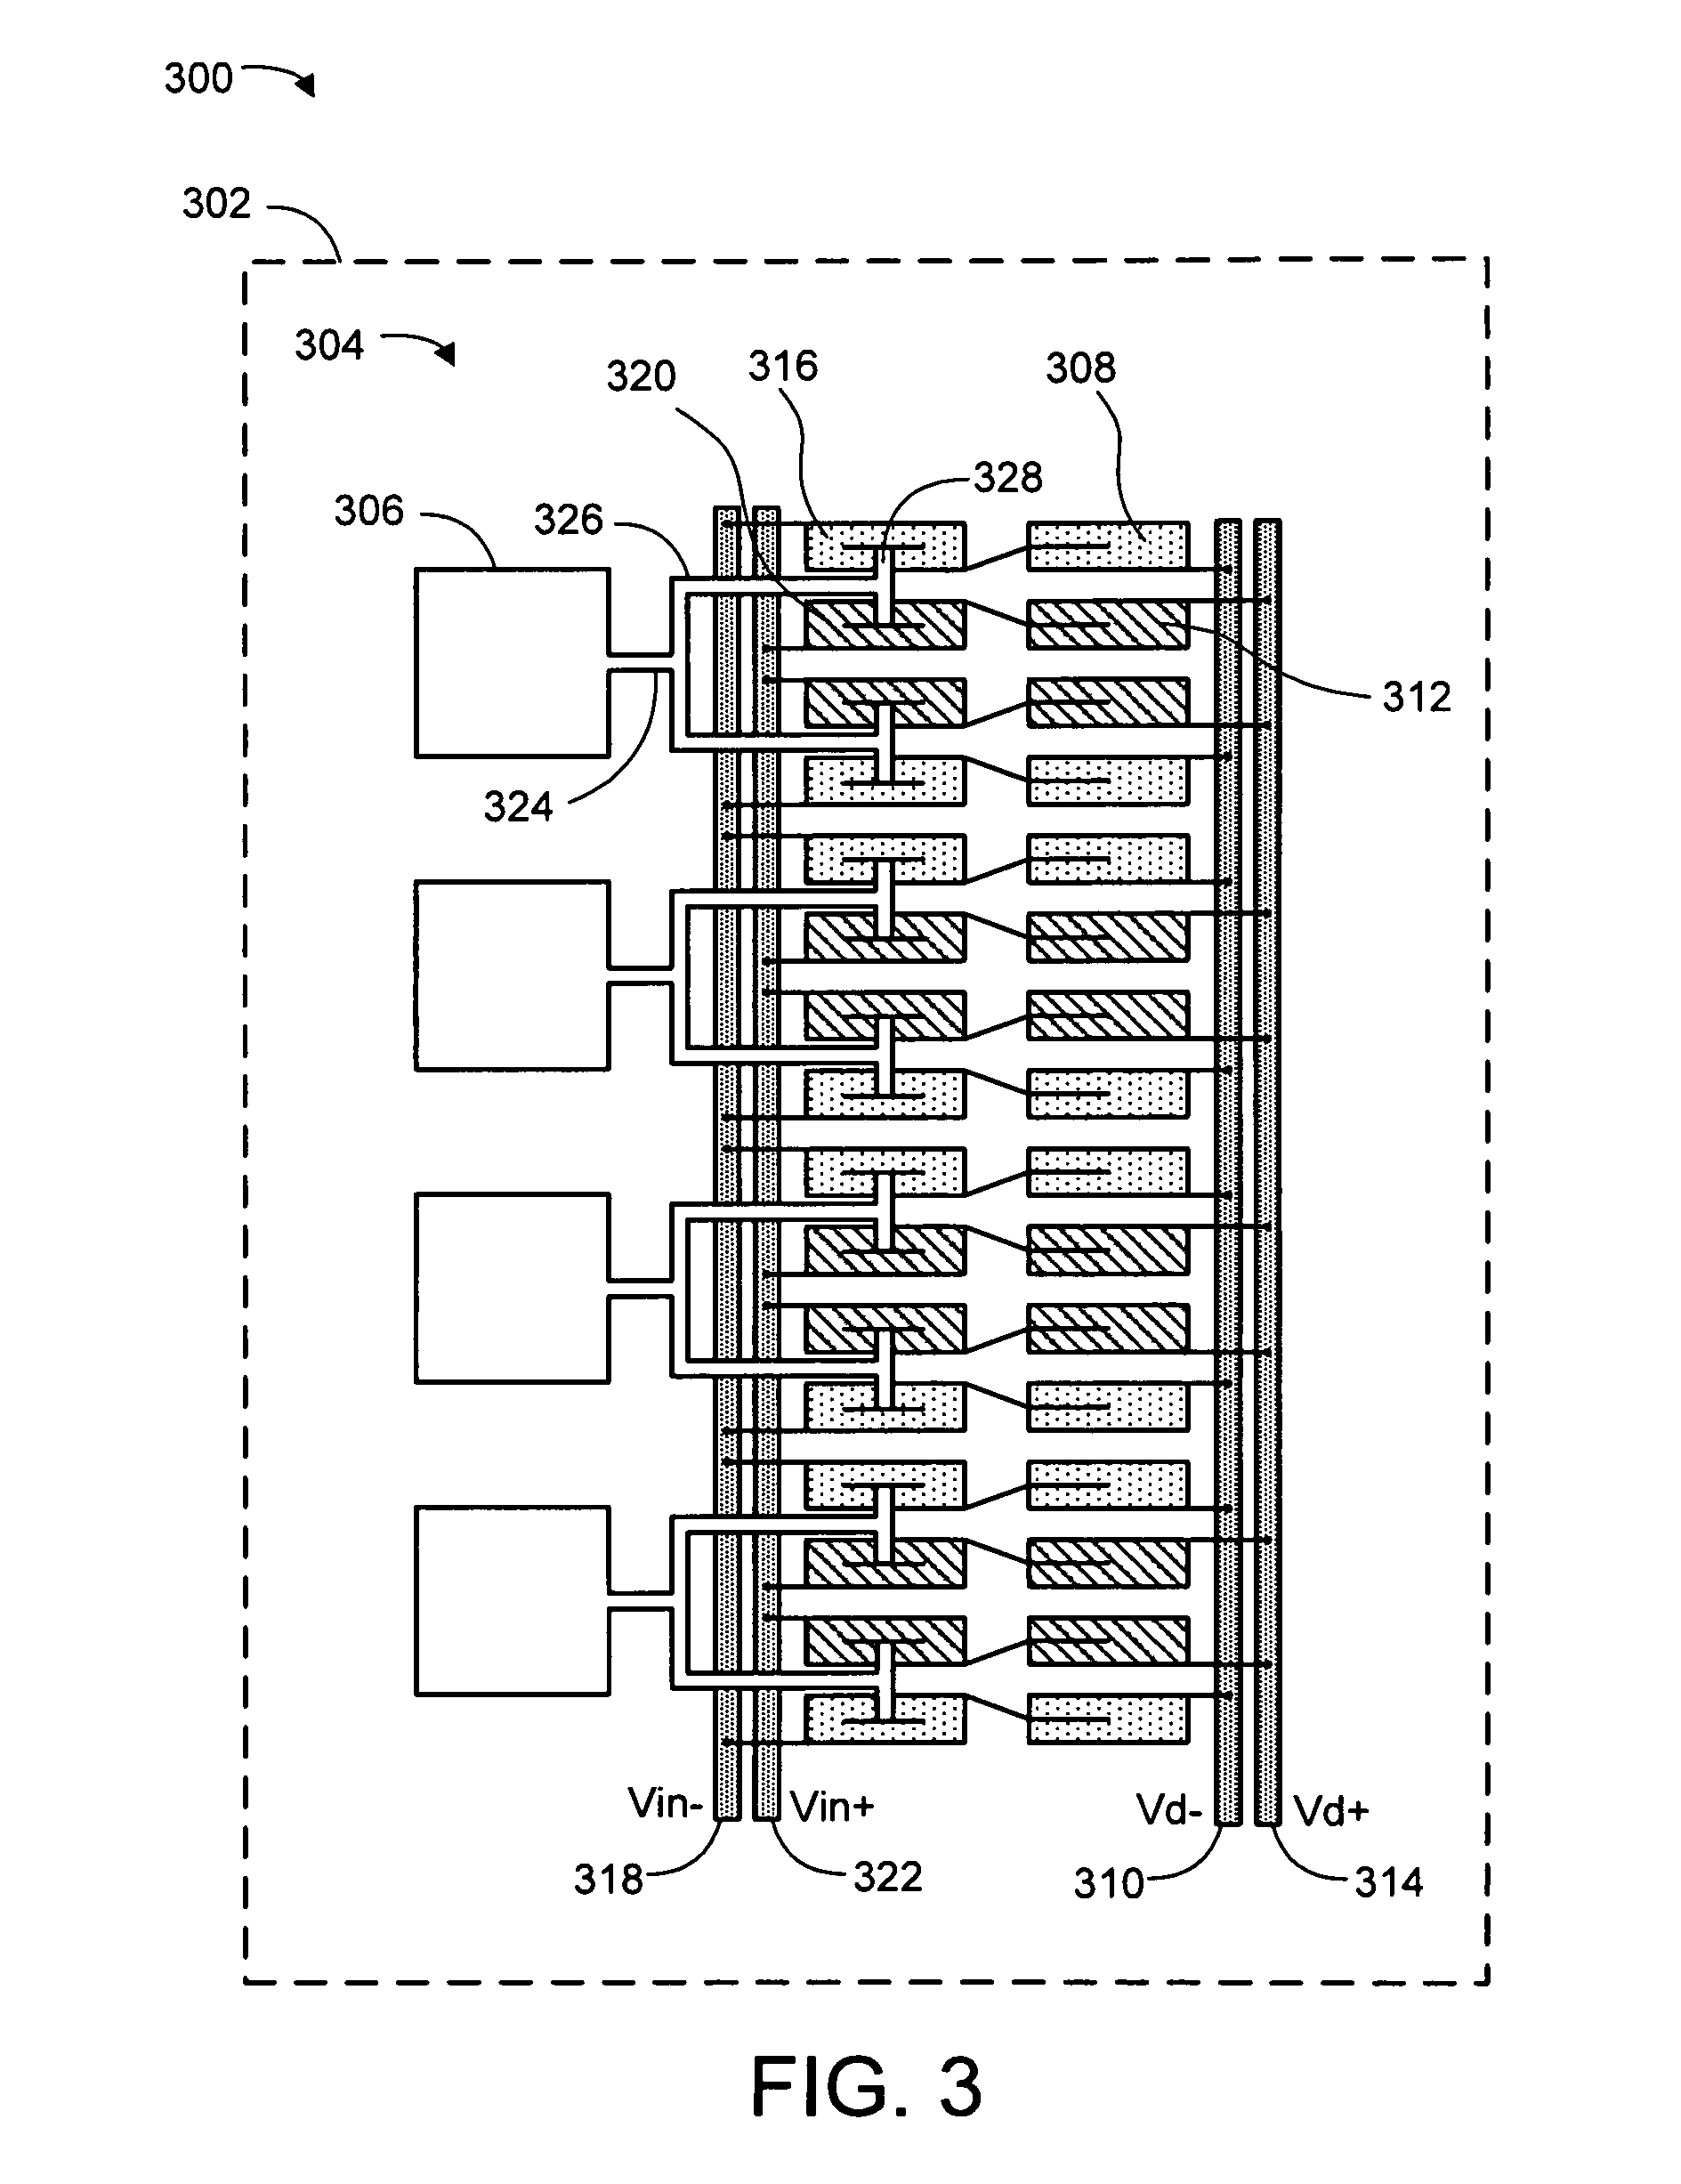 Transistor and routing layout for a radio frequency integrated CMOS power amplifier device